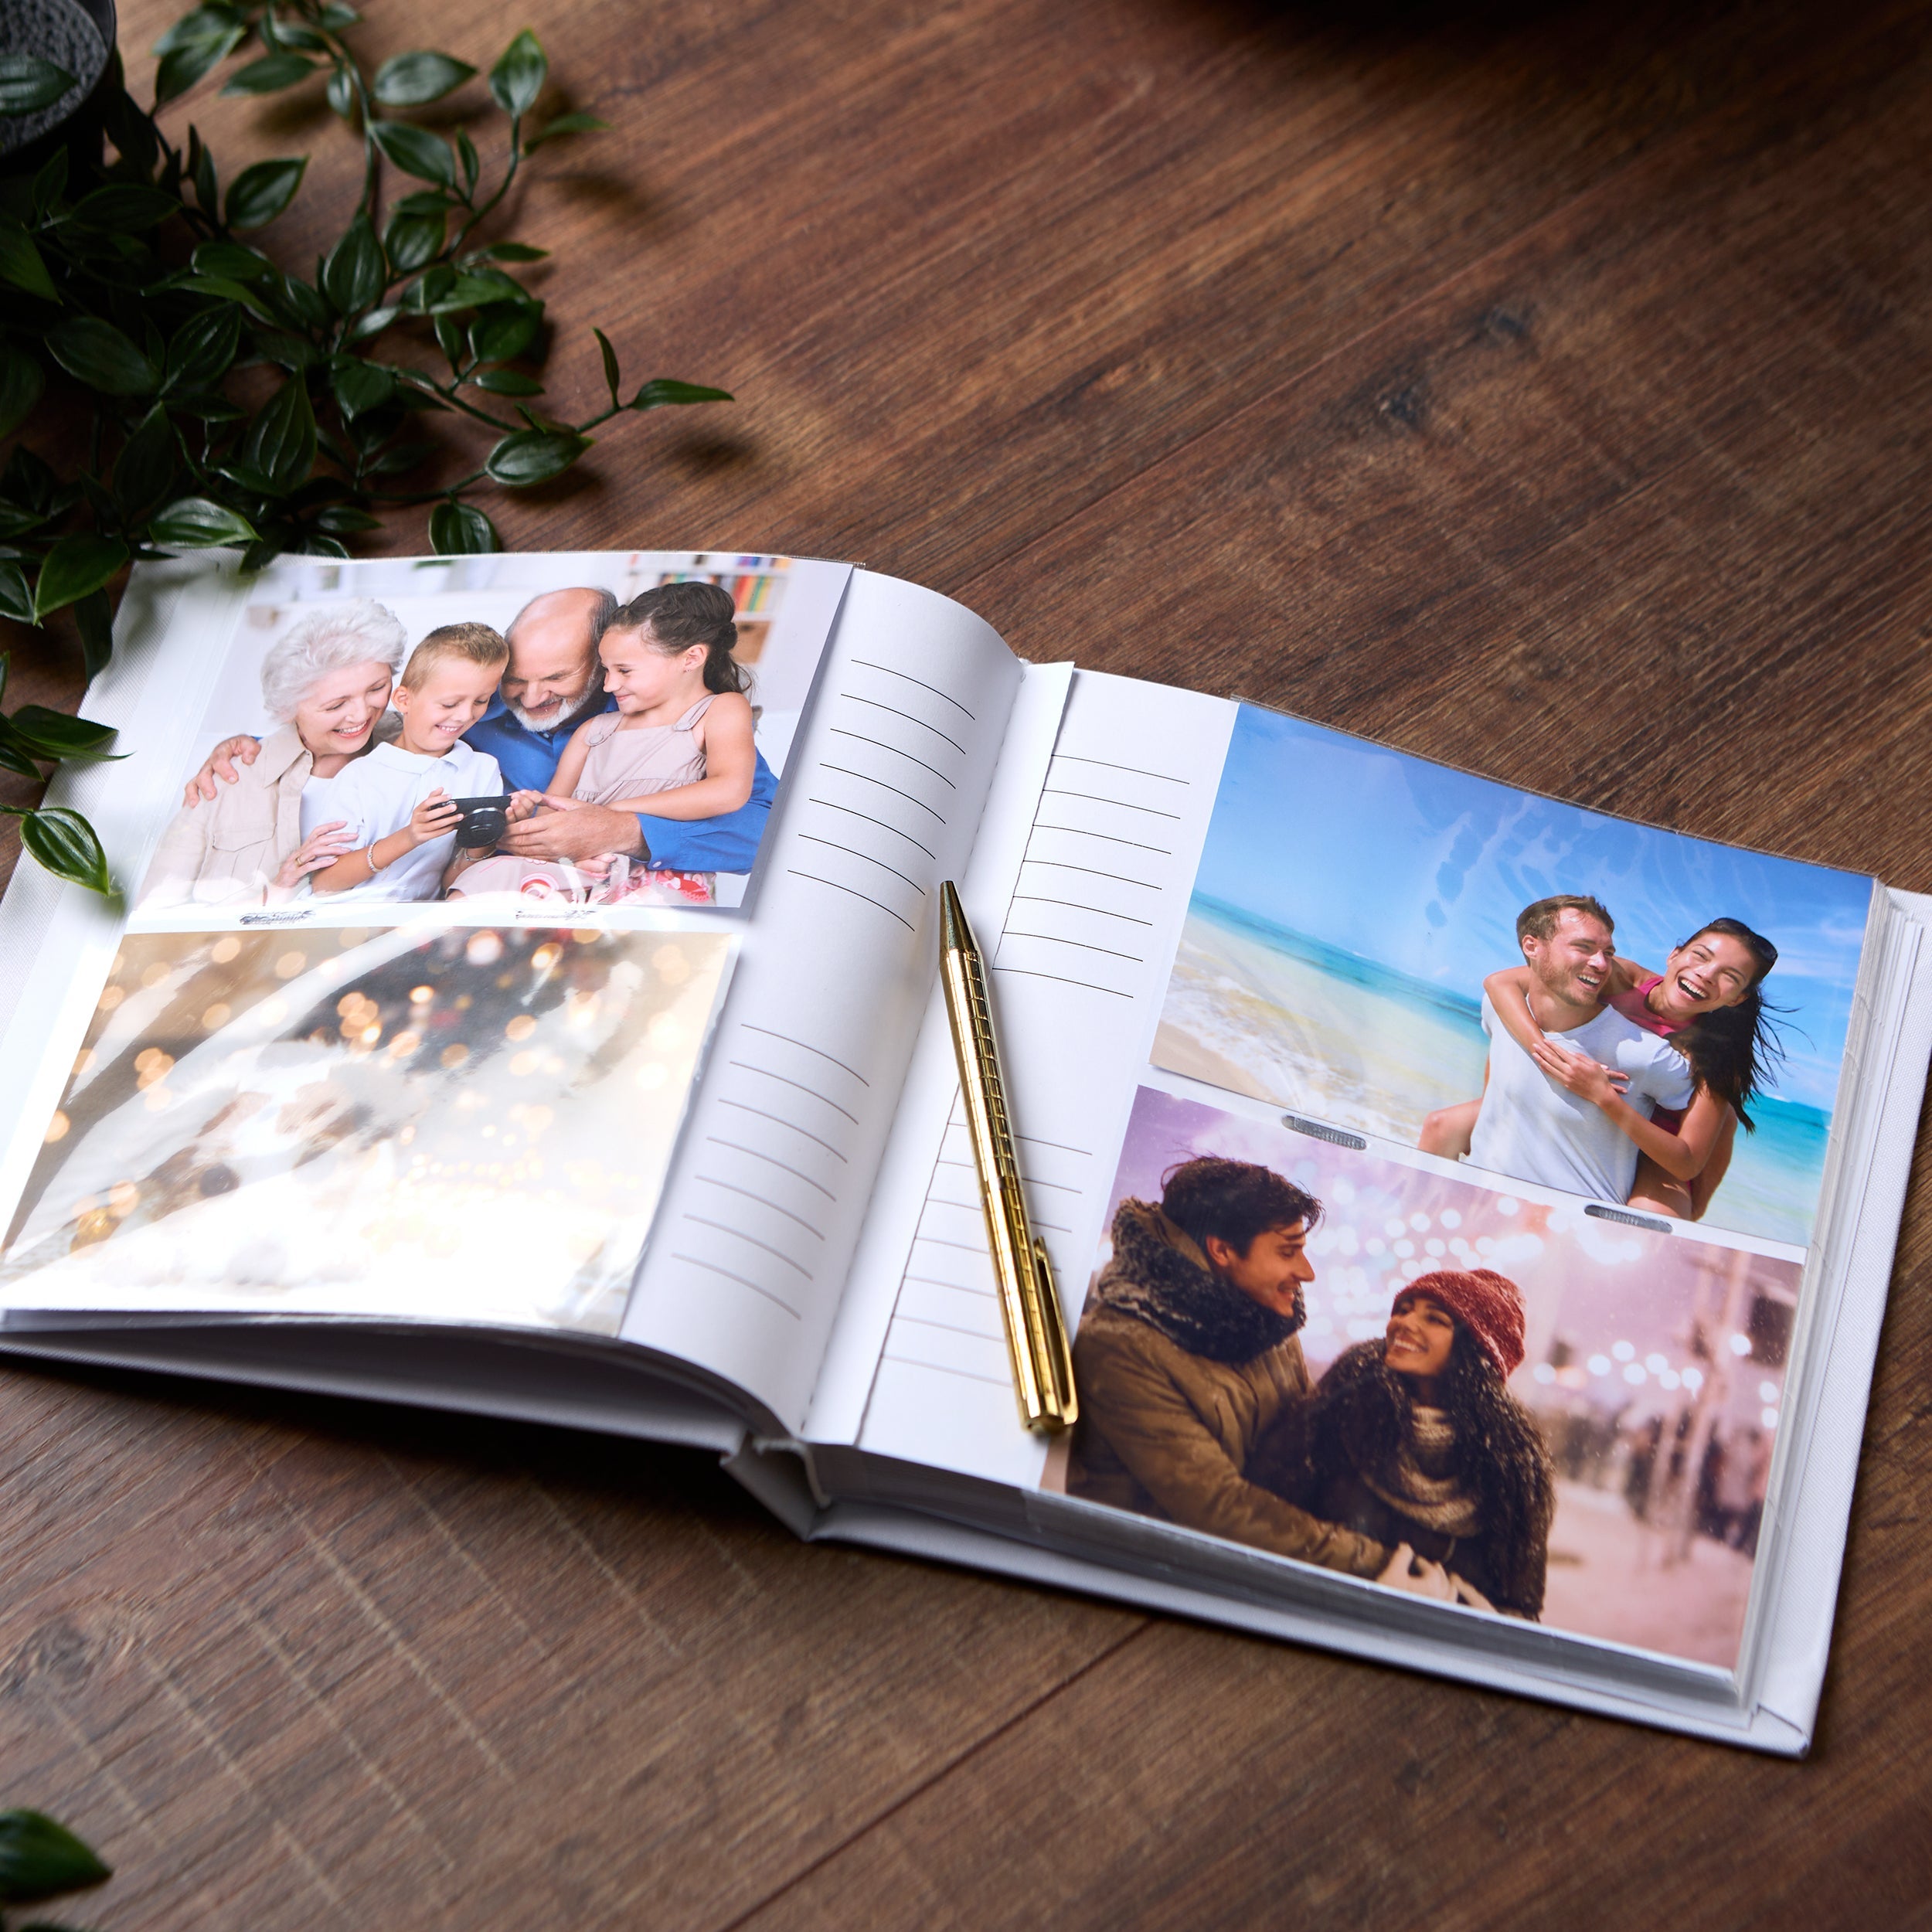 Large Book Bound Personalised Communion Photo Album With Silver Cross